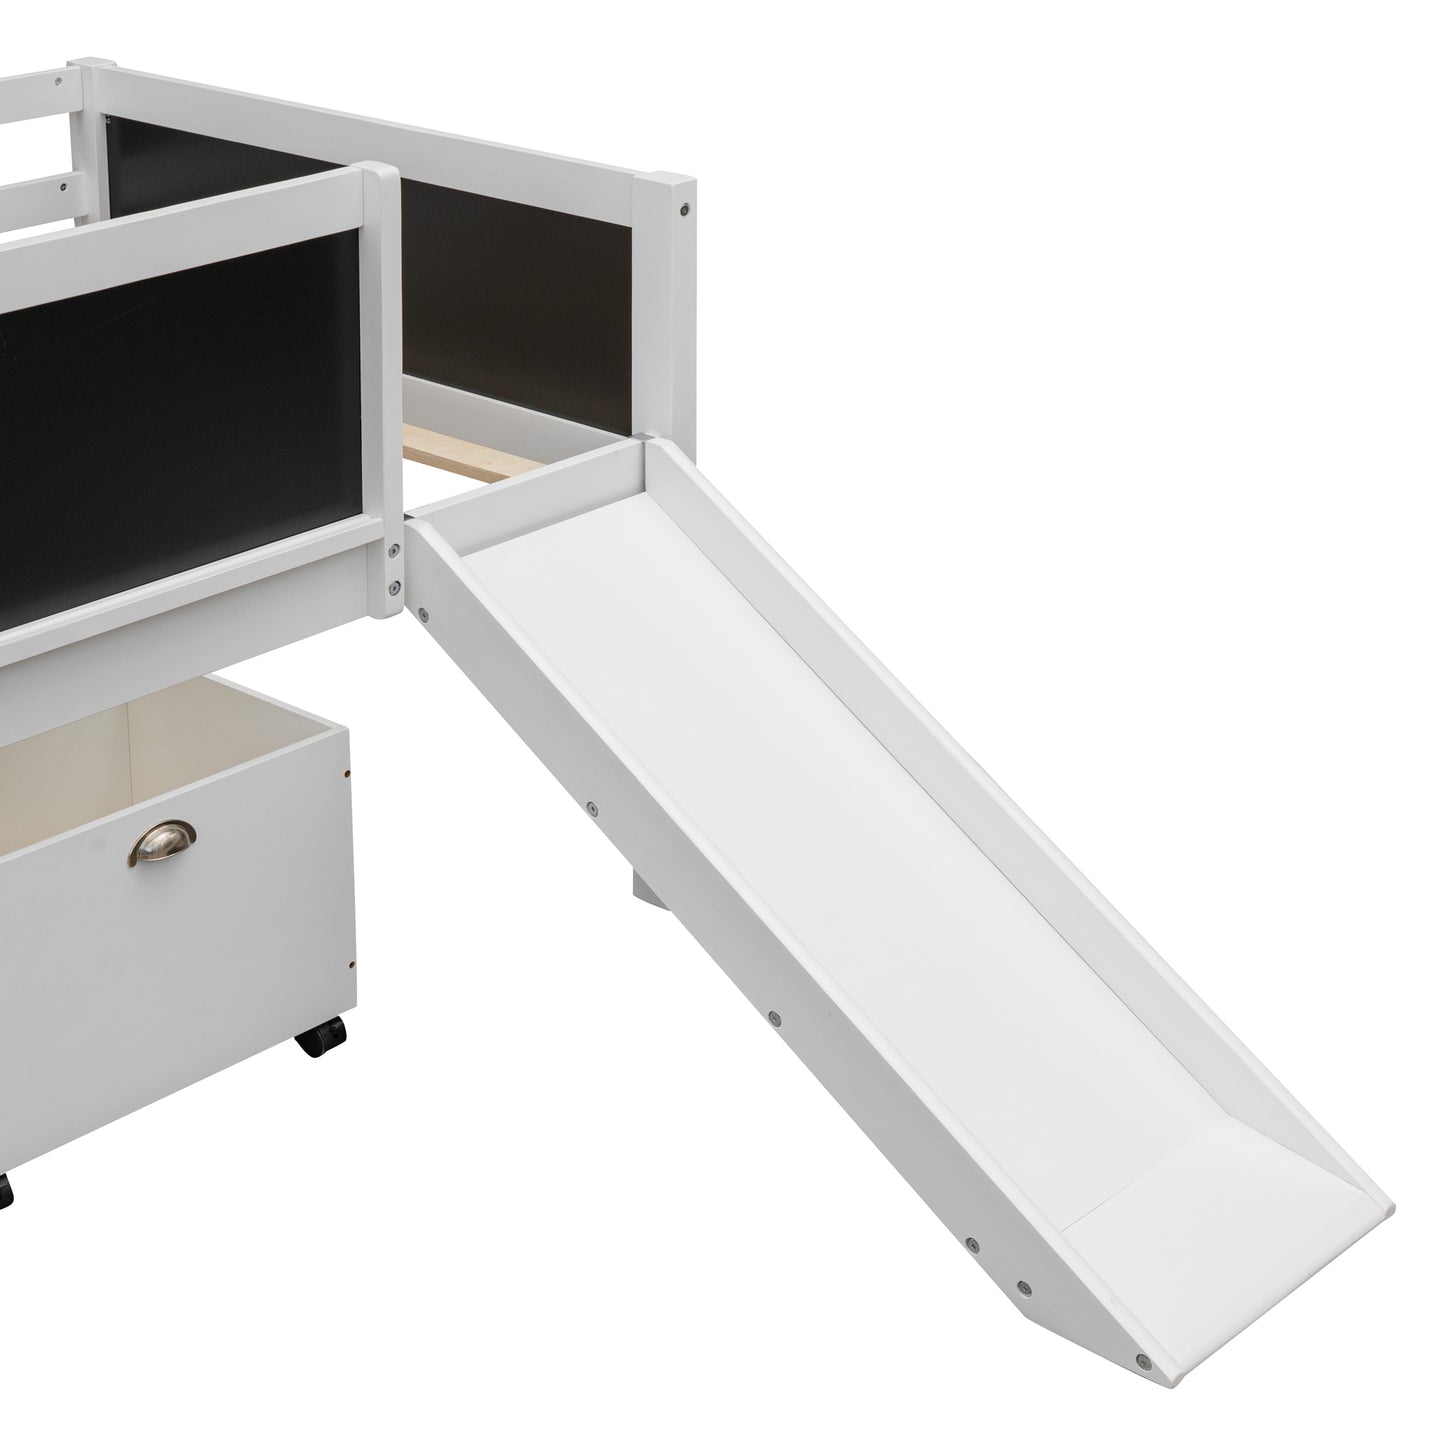 Twin size Loft Bed Wood Bed with Two Storage Boxes - White